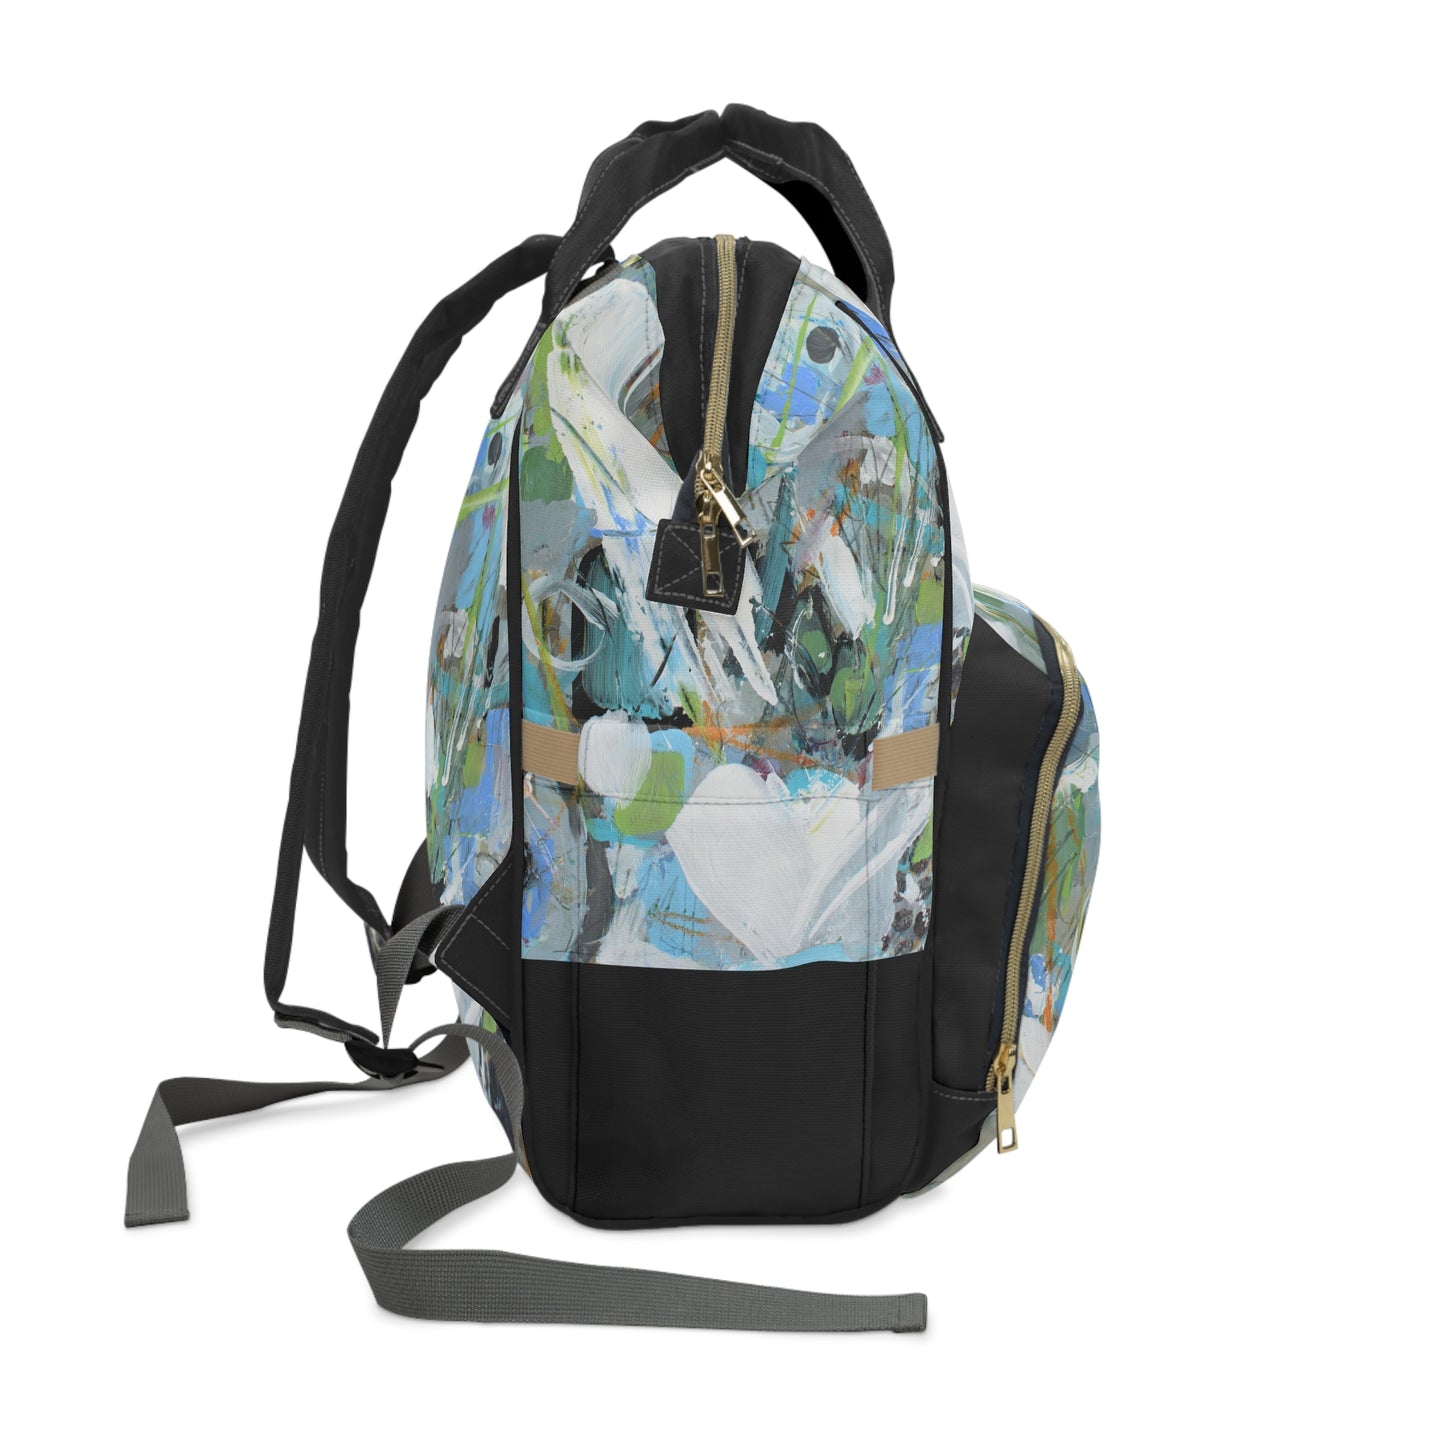 Word of Mouth, Multifunctional Diaper Backpack